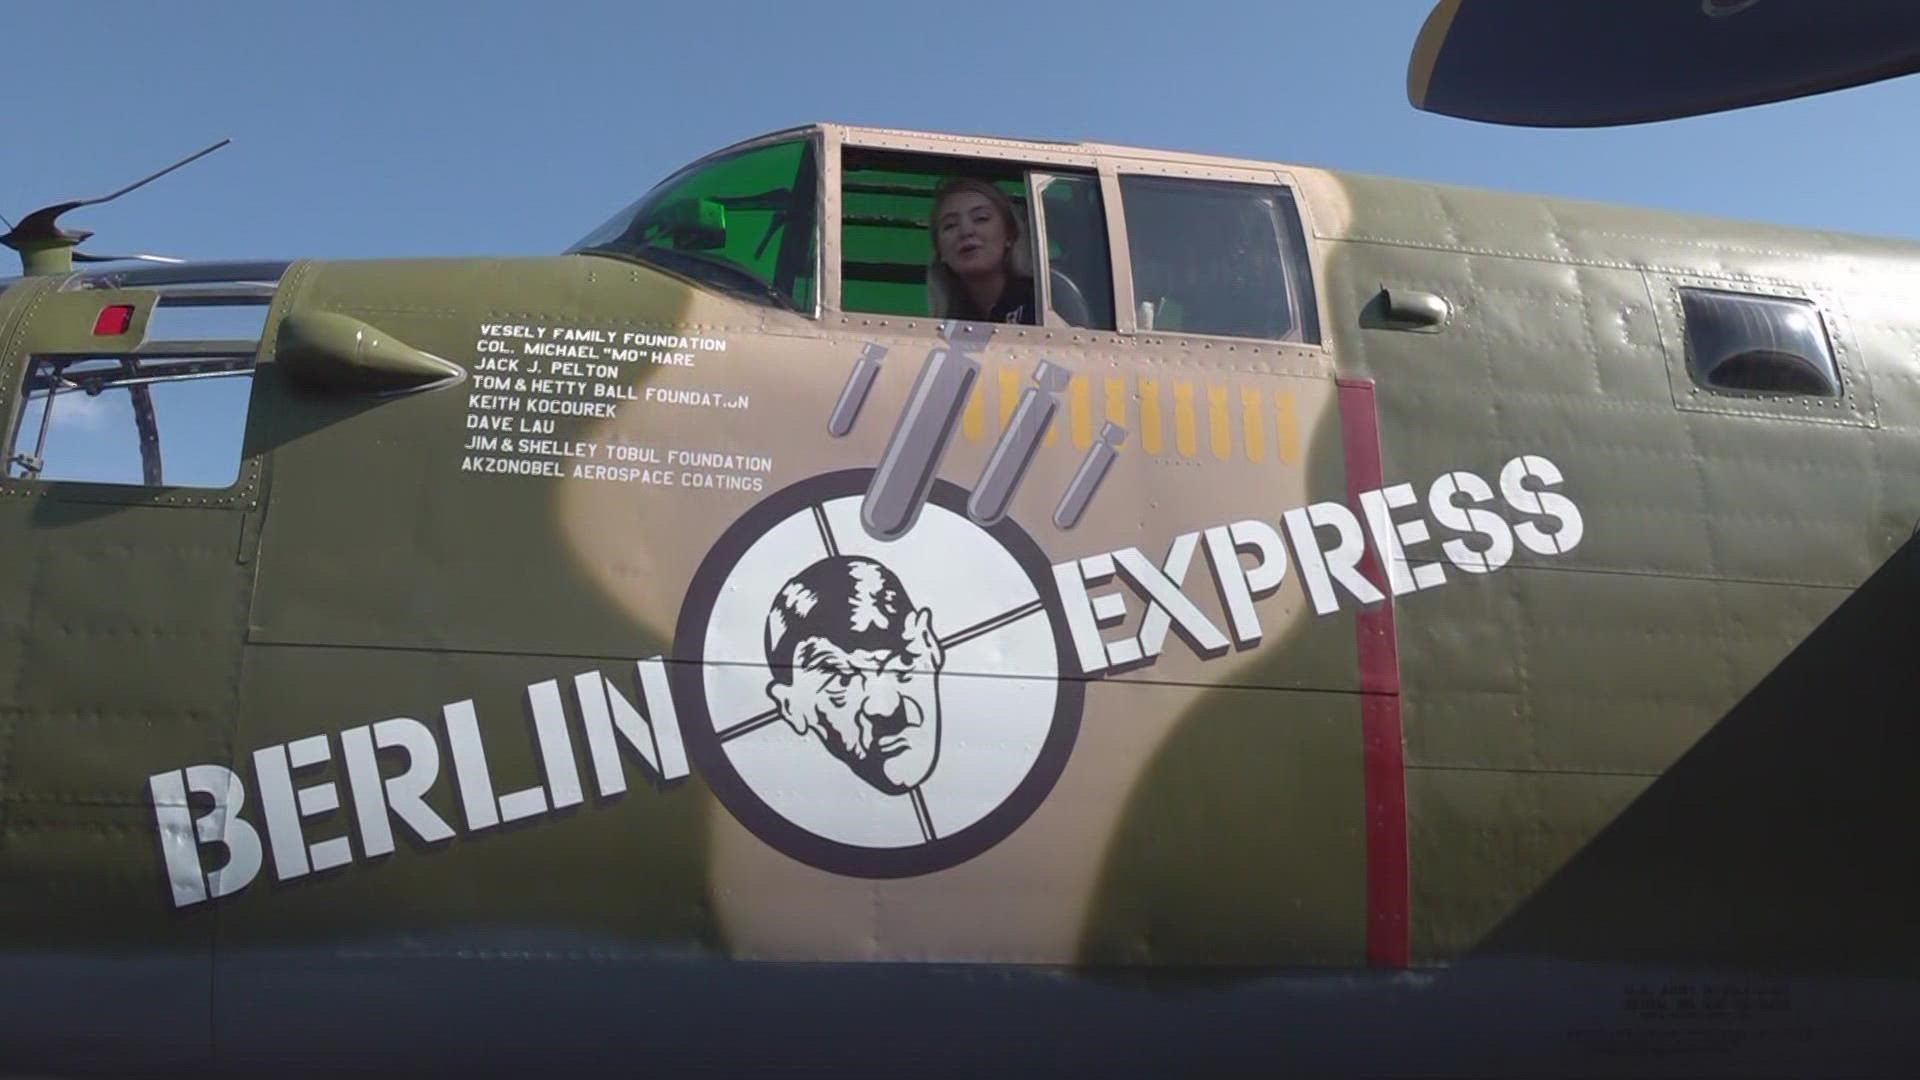 The B-25 Mitchell World War II Bomber is the centerpiece of the weekend activities at the Morristown Regional Airport.